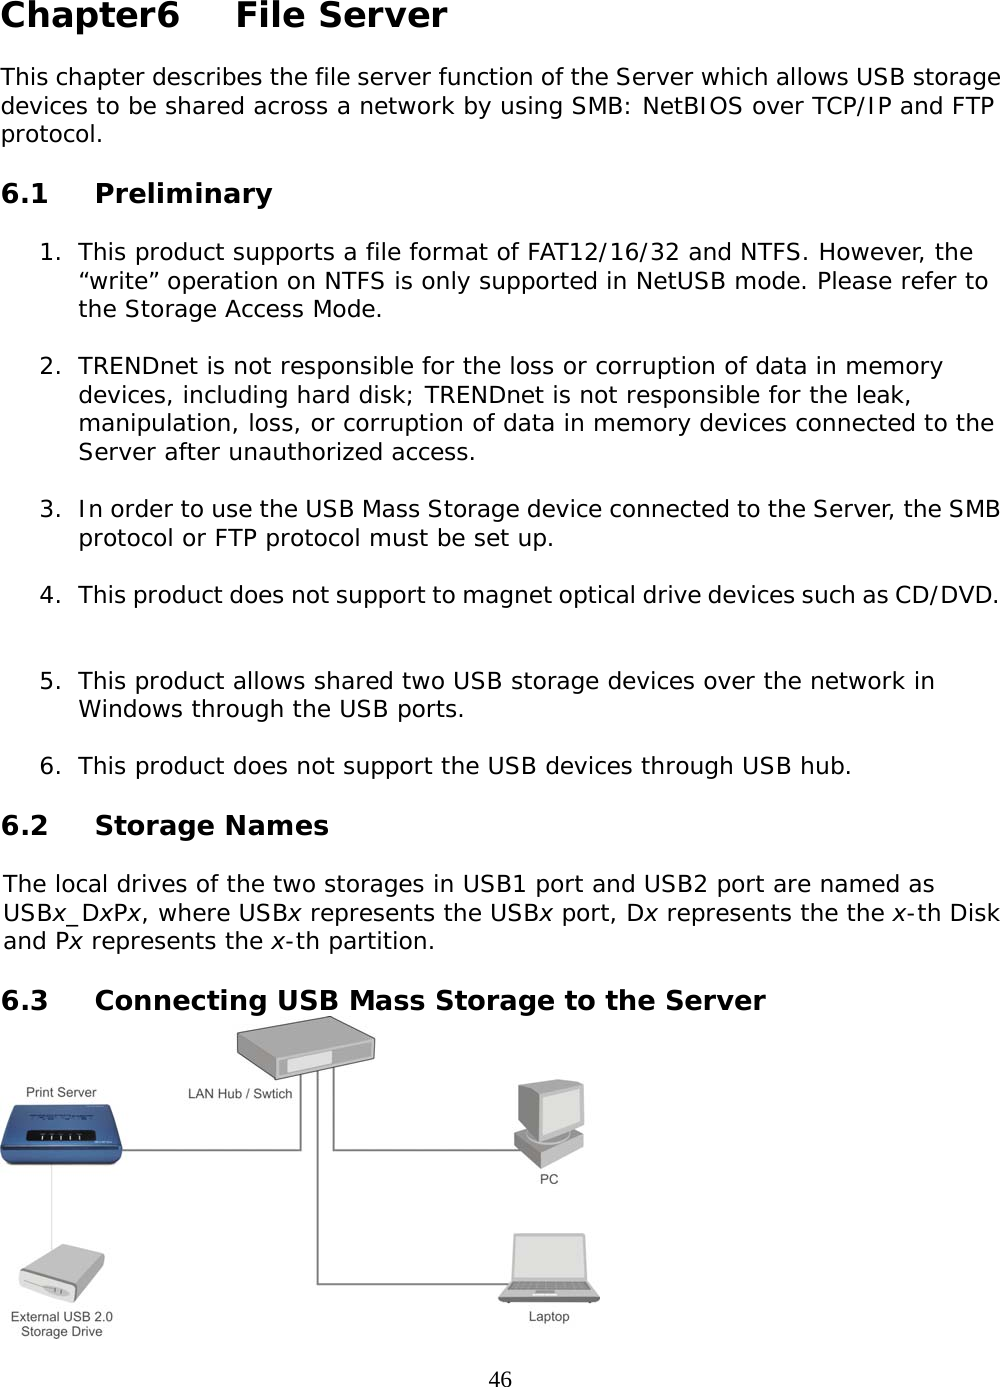     46 Chapter6   File Server  This chapter describes the file server function of the Server which allows USB storage devices to be shared across a network by using SMB: NetBIOS over TCP/IP and FTP protocol.  6.1 Preliminary  1. This product supports a file format of FAT12/16/32 and NTFS. However, the “write” operation on NTFS is only supported in NetUSB mode. Please refer to the Storage Access Mode.  2. TRENDnet is not responsible for the loss or corruption of data in memory devices, including hard disk; TRENDnet is not responsible for the leak, manipulation, loss, or corruption of data in memory devices connected to the Server after unauthorized access.   3. In order to use the USB Mass Storage device connected to the Server, the SMB protocol or FTP protocol must be set up.   4. This product does not support to magnet optical drive devices such as CD/DVD.    5. This product allows shared two USB storage devices over the network in Windows through the USB ports.   6. This product does not support the USB devices through USB hub.    6.2 Storage Names  The local drives of the two storages in USB1 port and USB2 port are named as USBx_DxPx, where USBx represents the USBx port, Dx represents the the x-th Disk and Px represents the x-th partition.   6.3  Connecting USB Mass Storage to the Server  